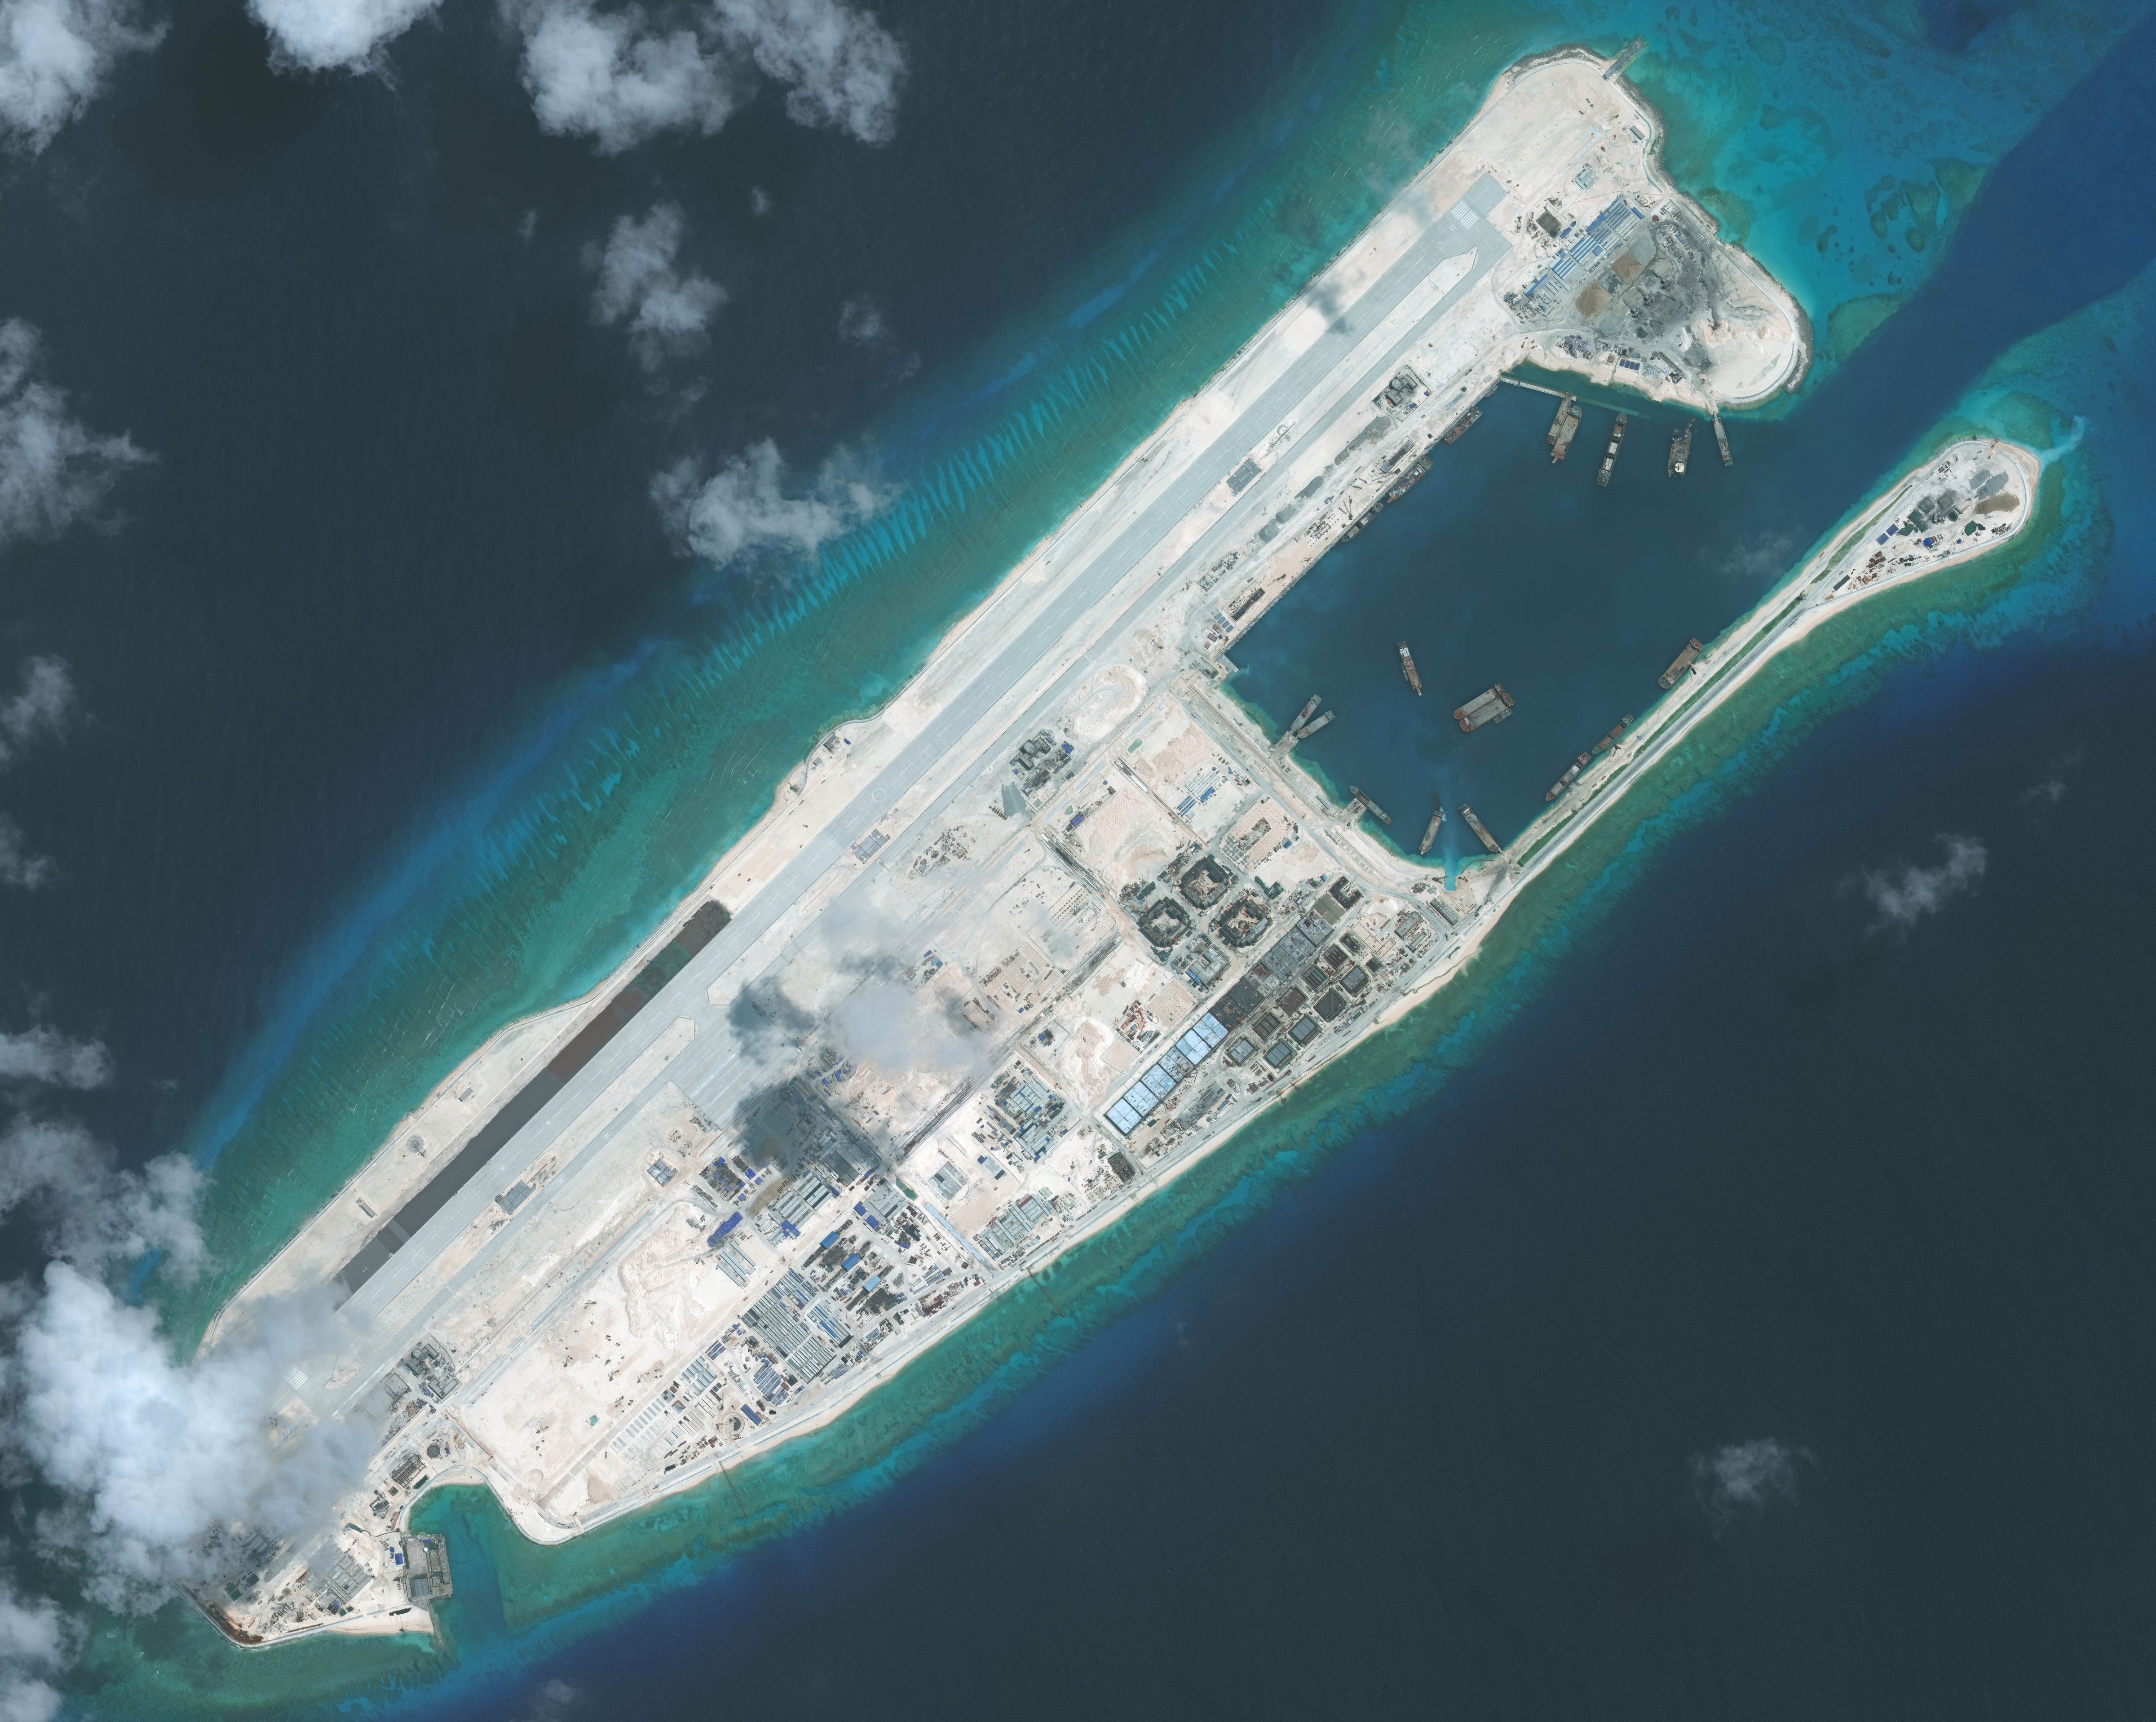 DigitalGlobe imagery of the nearly completed construction within the Fiery Cross Reef located in the South China Sea (DigitalGlobe—ScapeWare3/Getty Images)